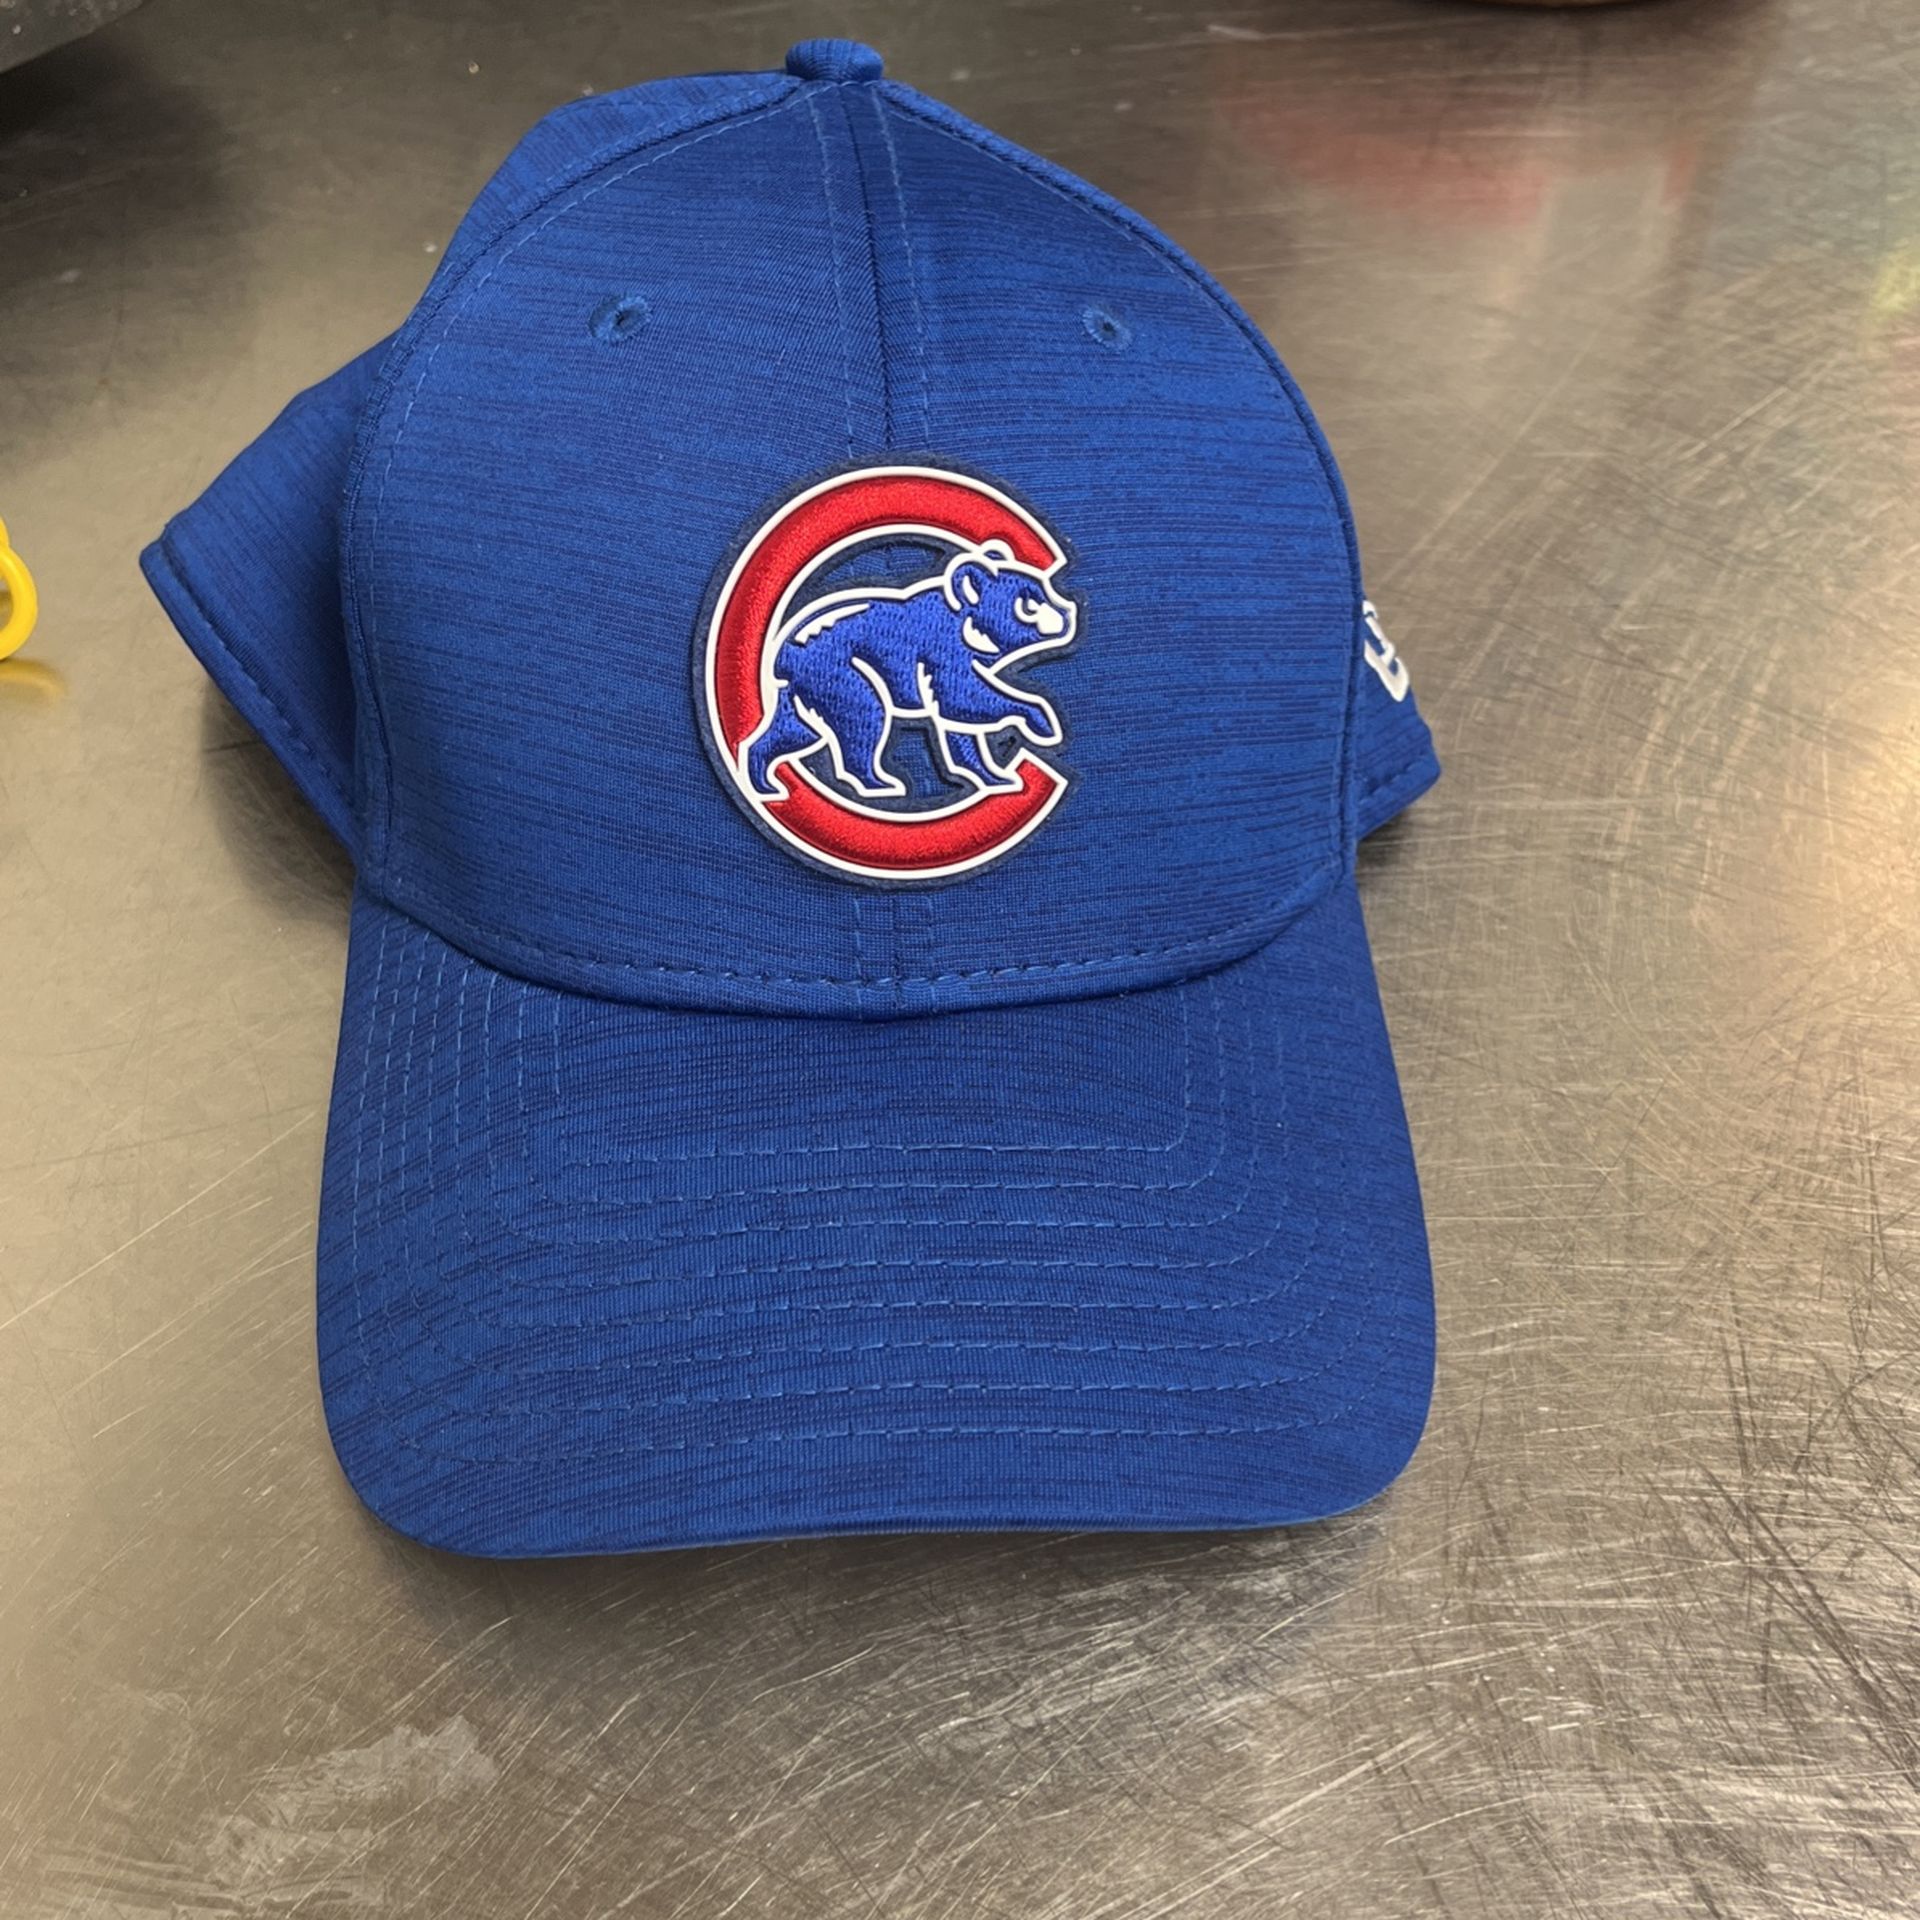 Cubs Spring Training, Hat for Sale in Mesa, AZ - OfferUp